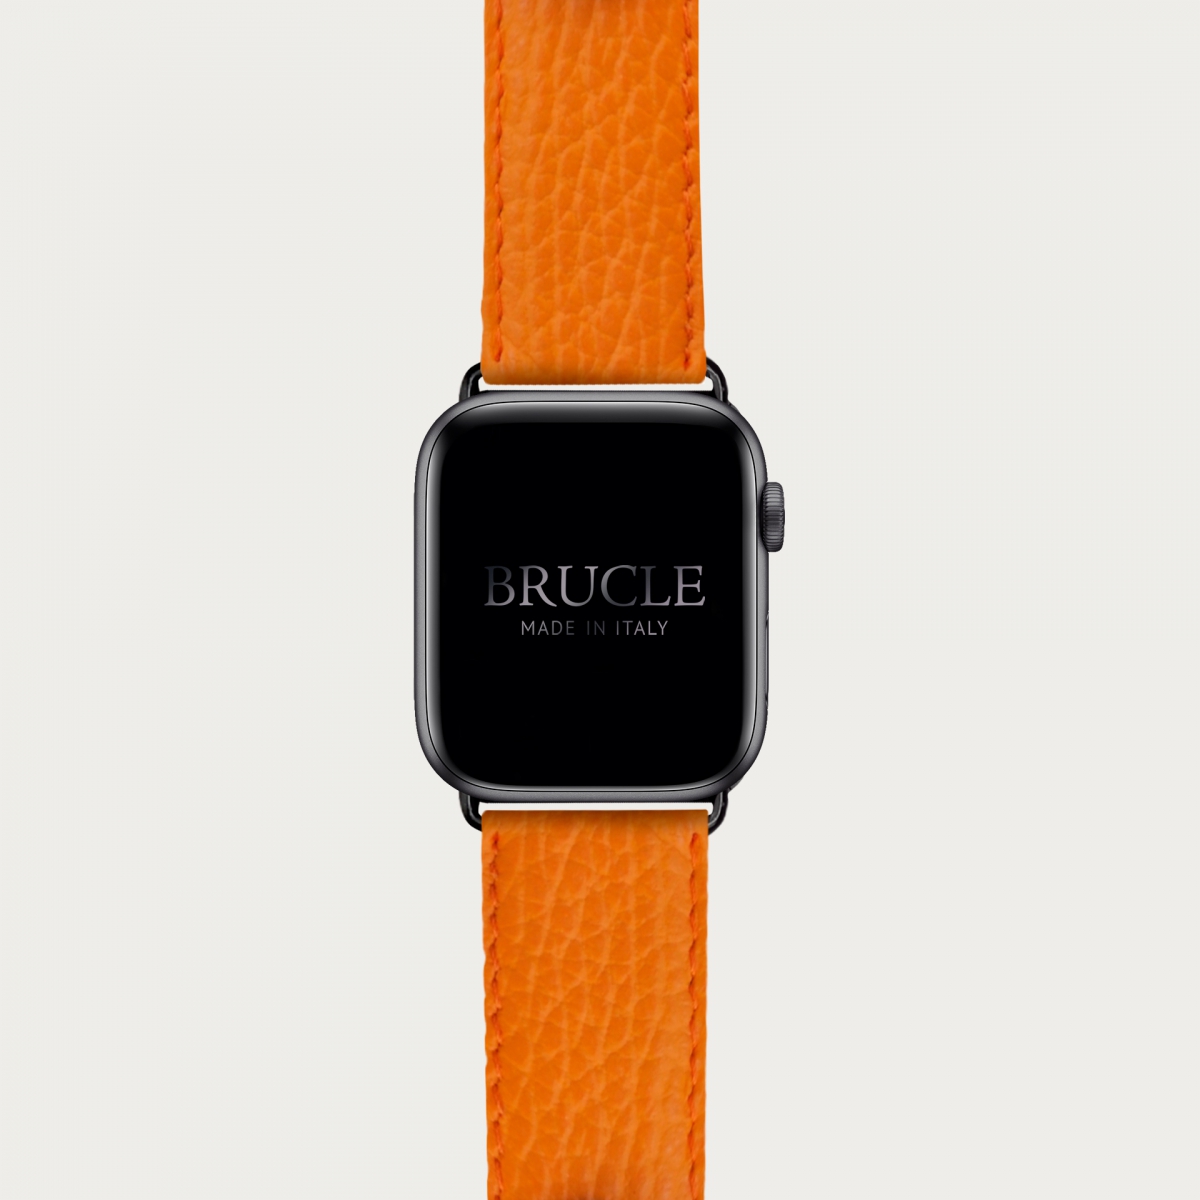 Leather Watch band compatible with Apple Watch / Samsung smartwatch, orange  dollar print